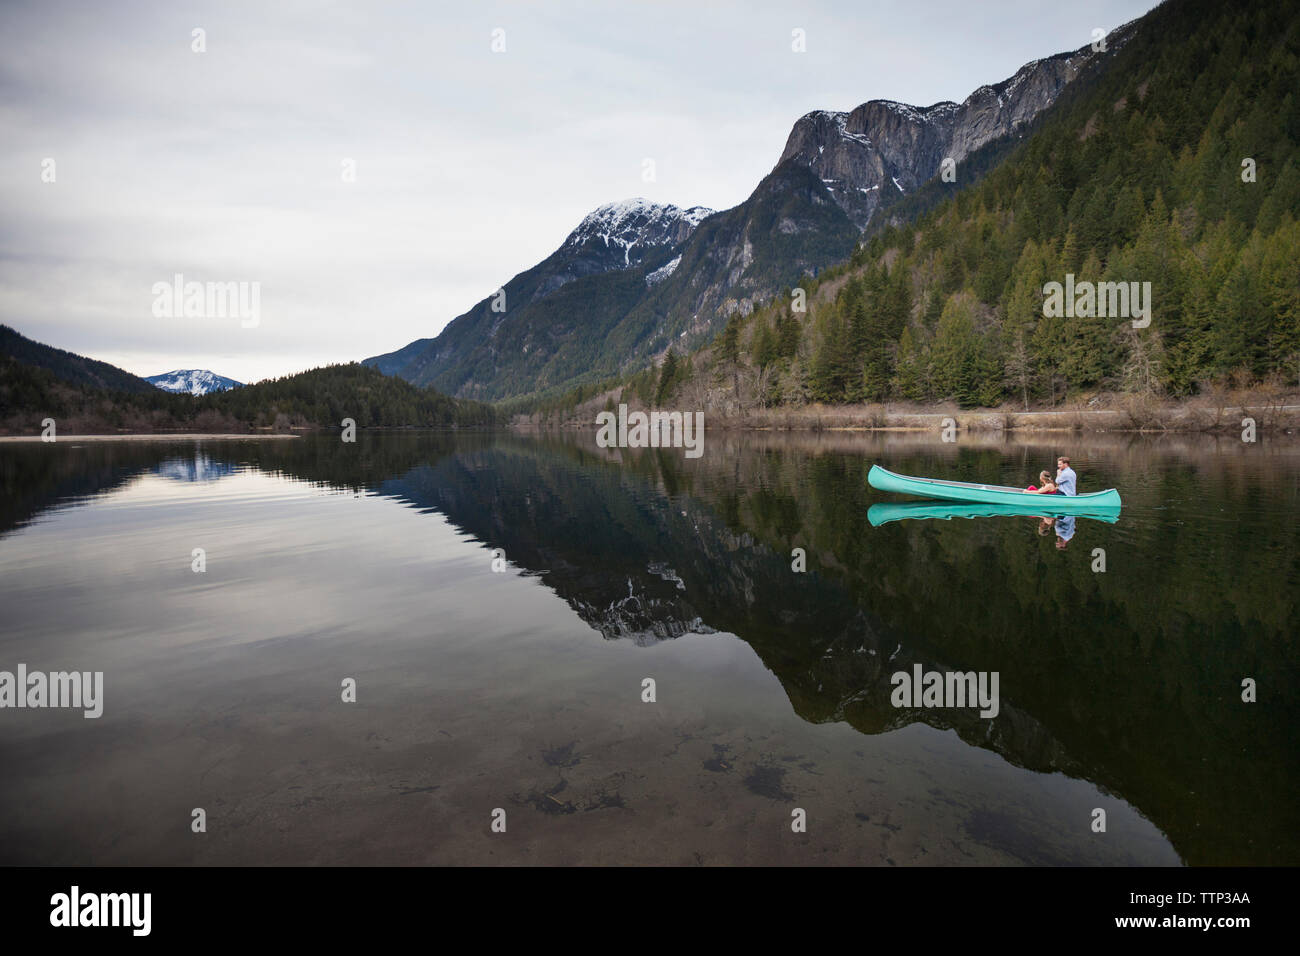 Mid distance view of young couple canoeing on lake against mountains Stock Photo